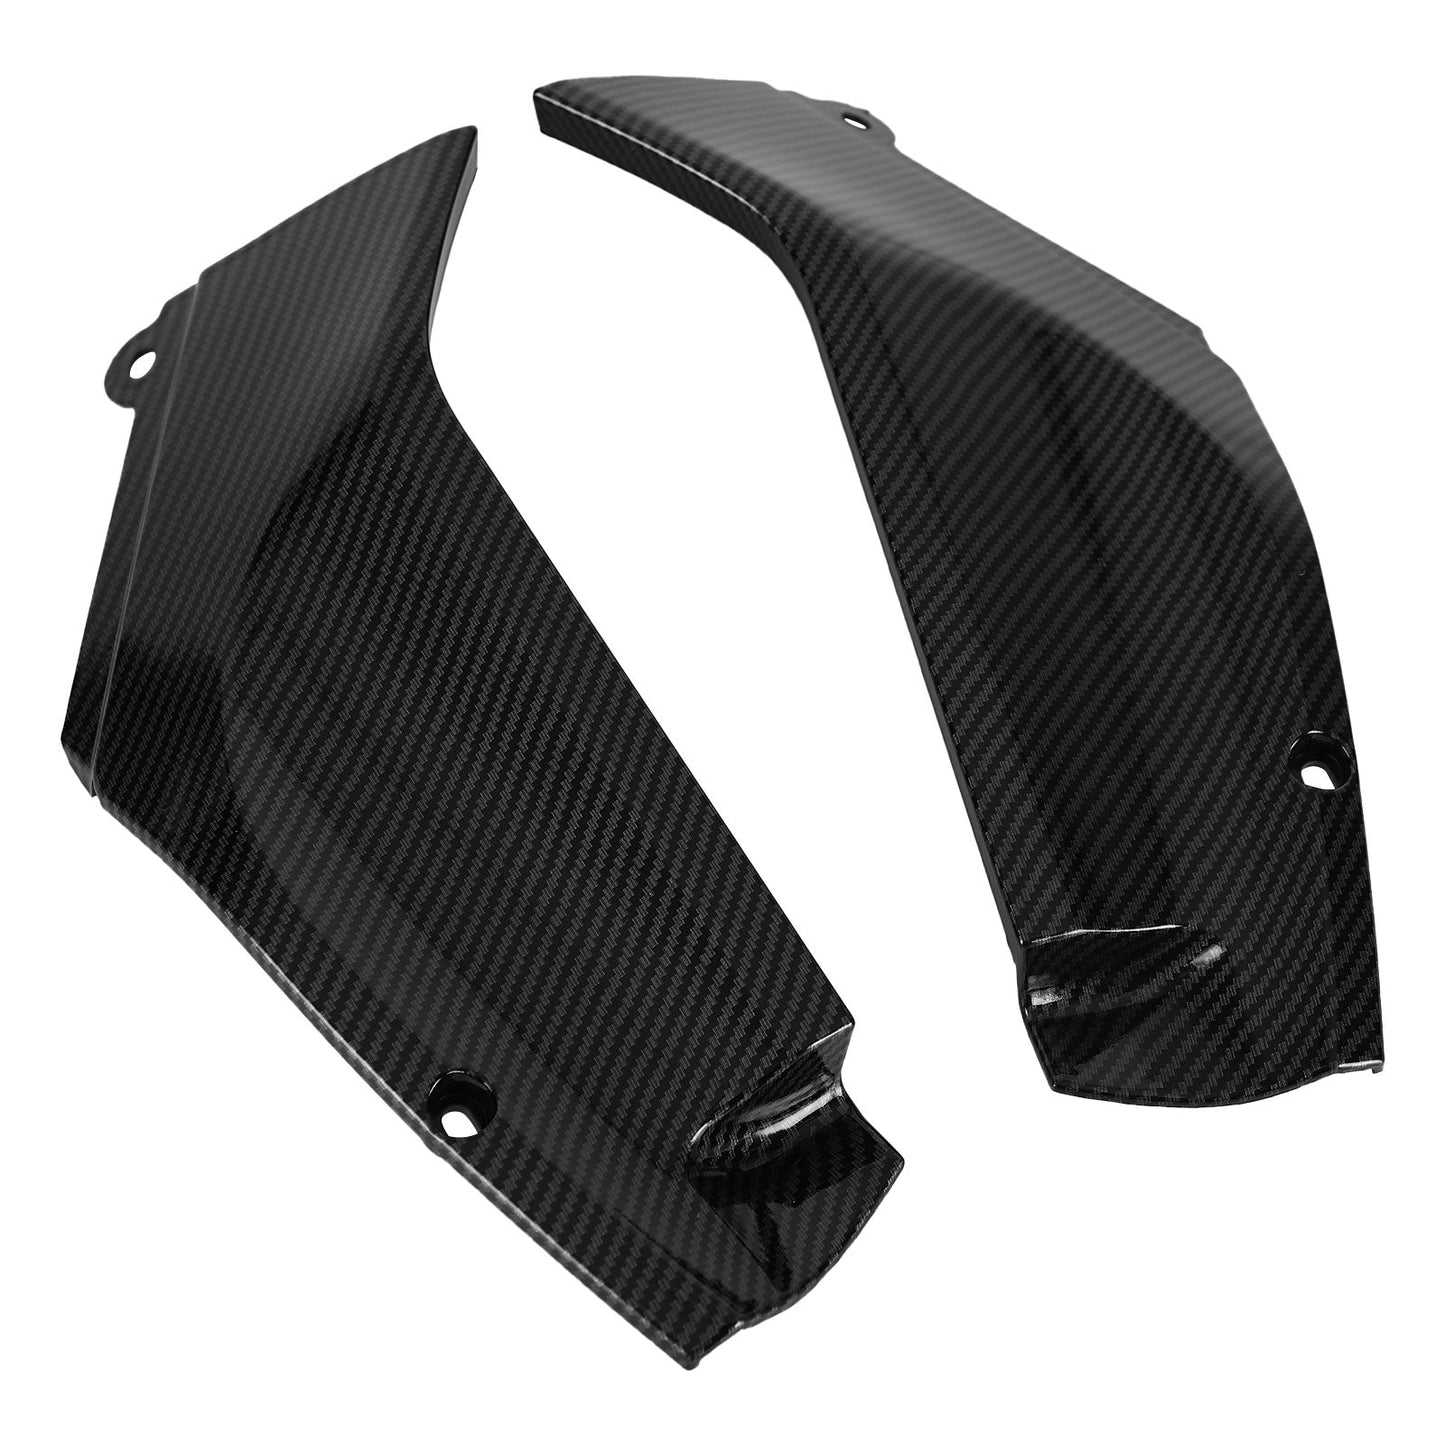 Gas Tank Side Trim Cover Panel Fairing Cowl for Yamaha YZF R1 1998-2001 Carbon